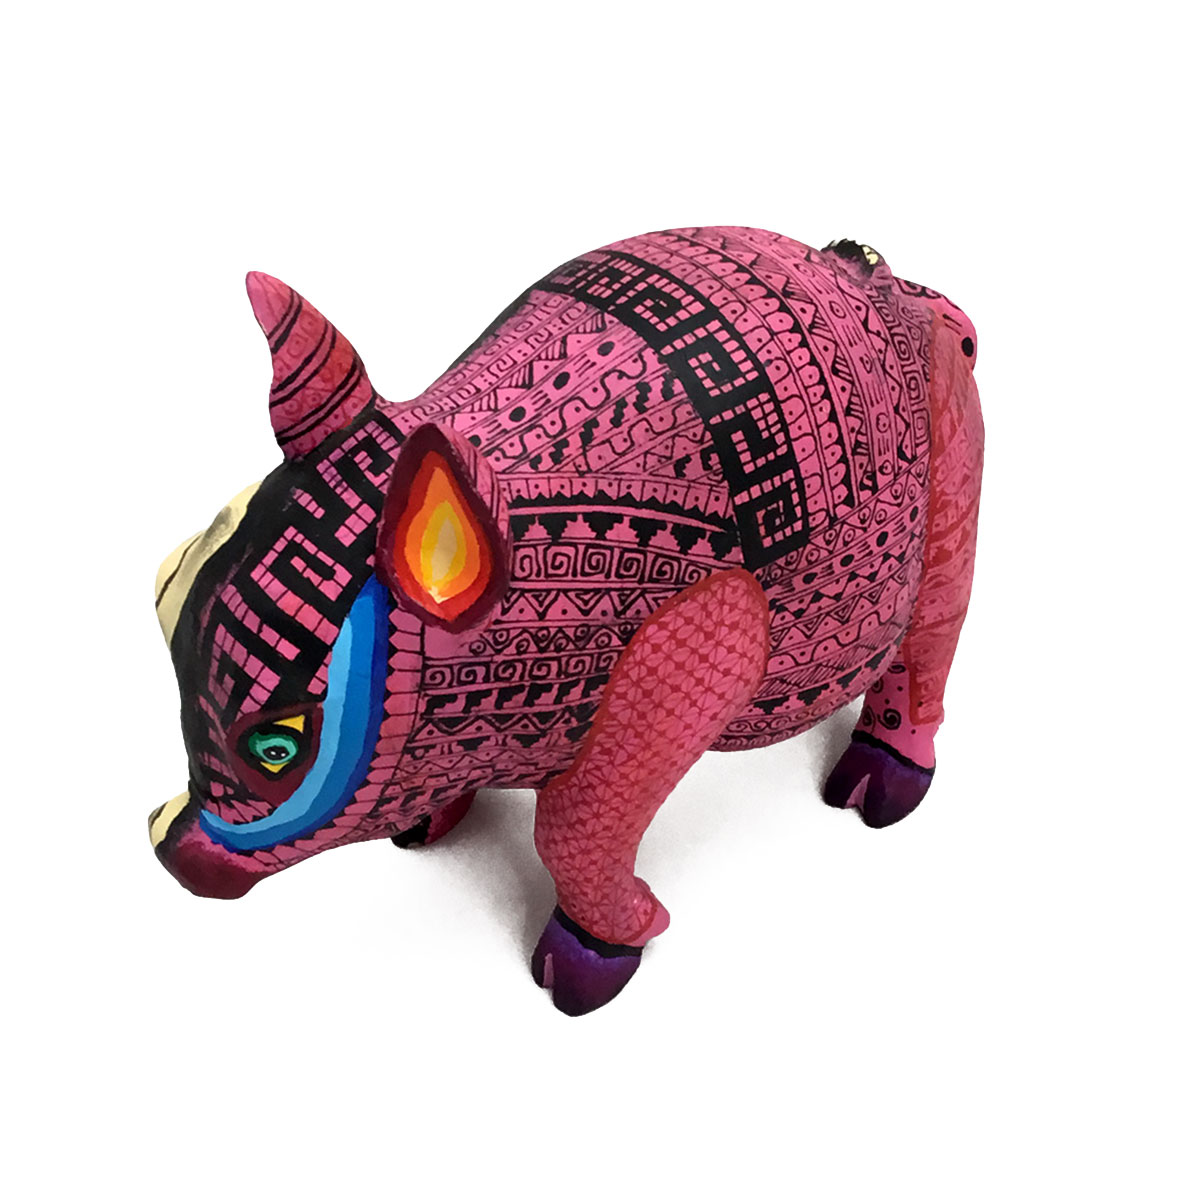 Eleazar Morales Eleazar Morales: Day of the Dead Pig Day of the Dead